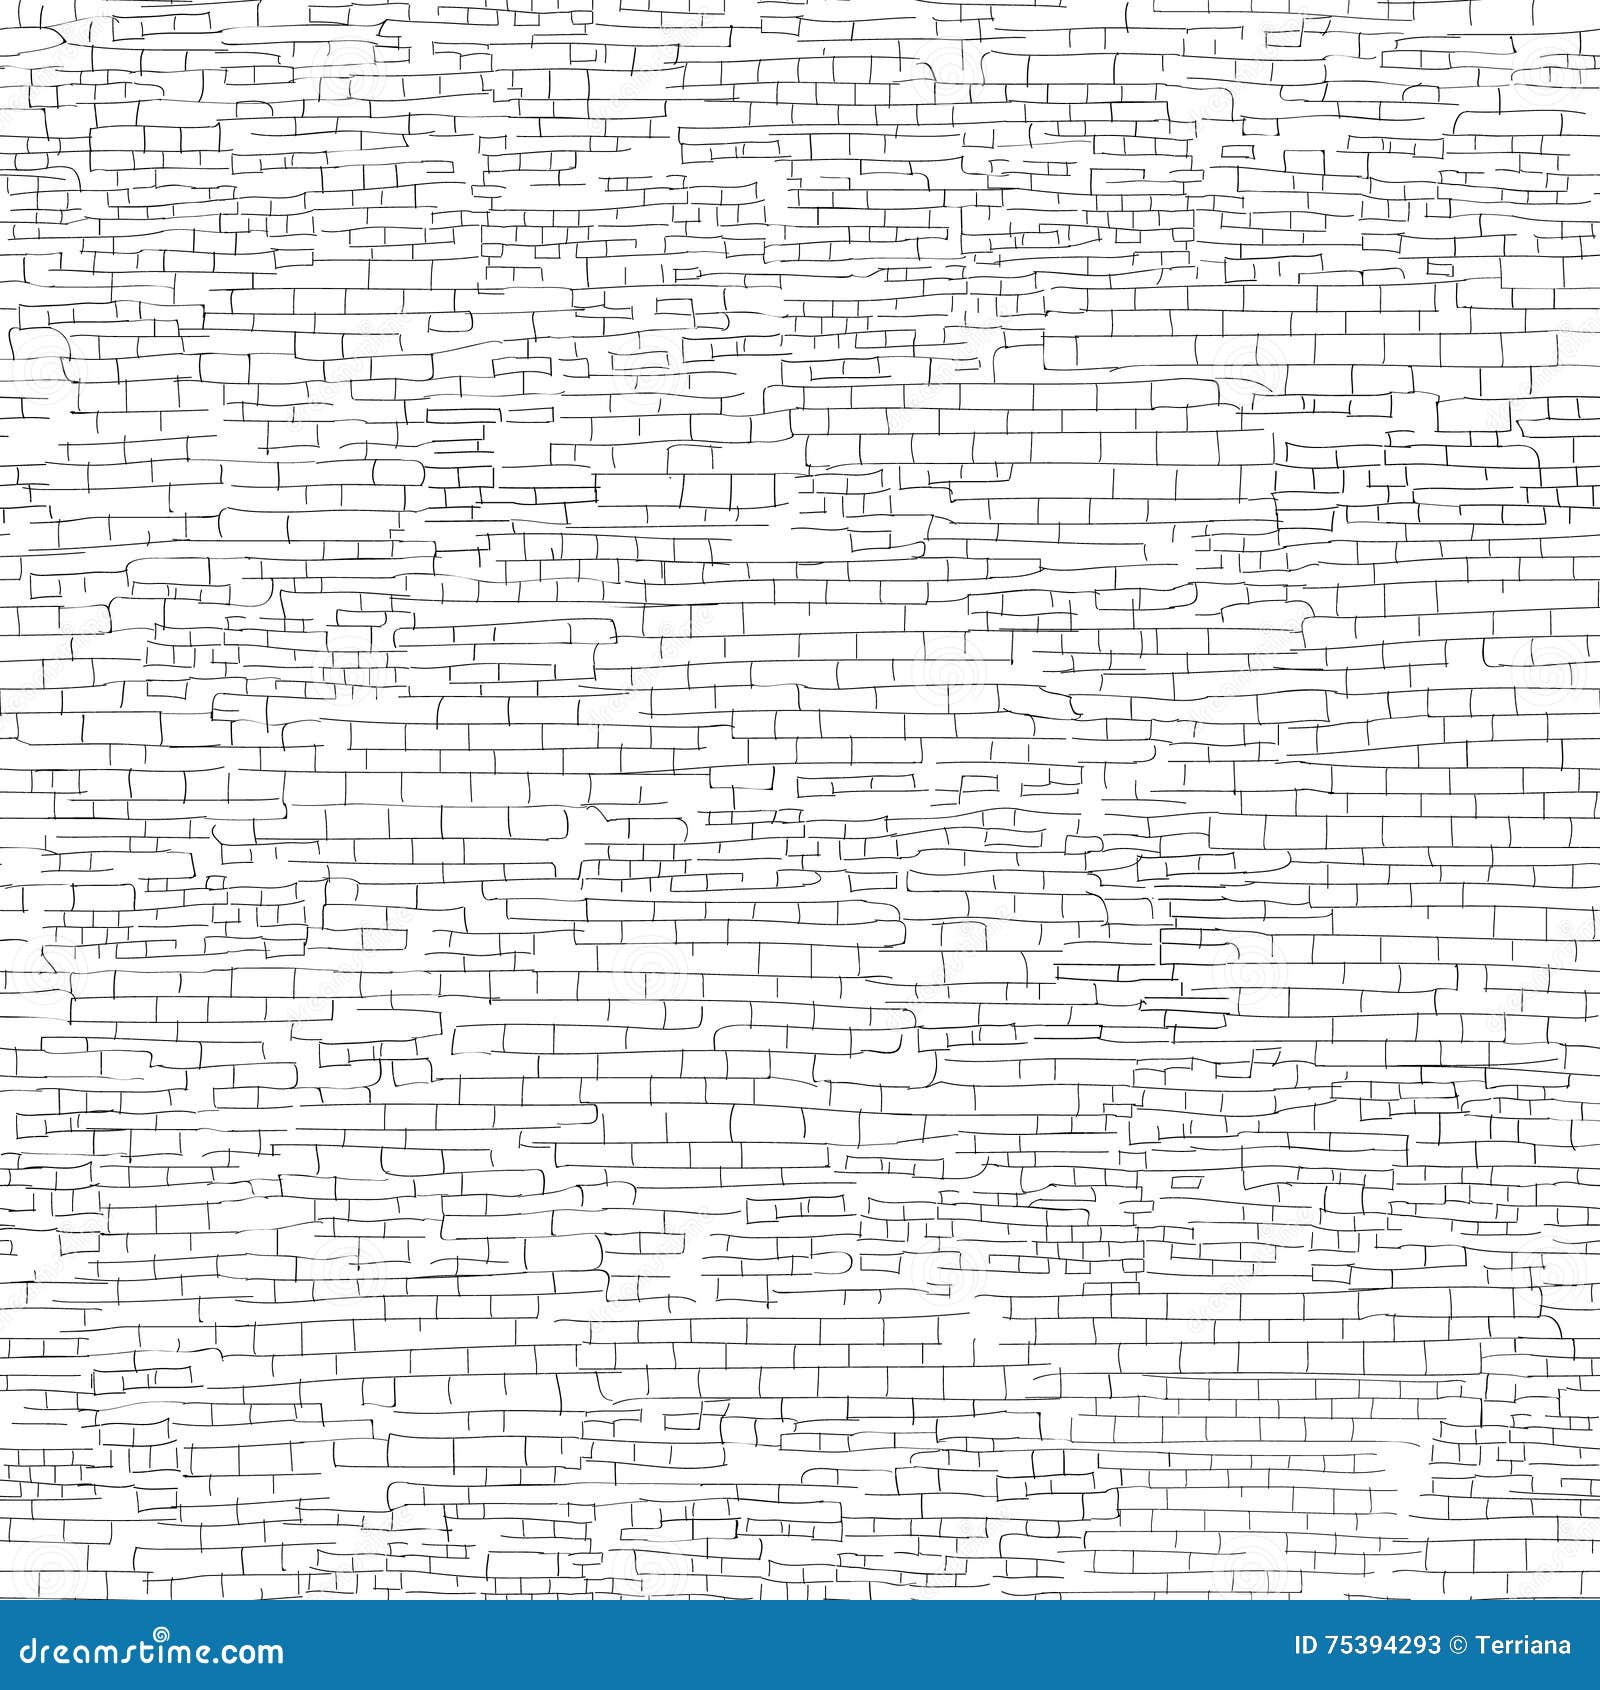 602 Brick Wall Etching Images, Stock Photos & Vectors | Shutterstock